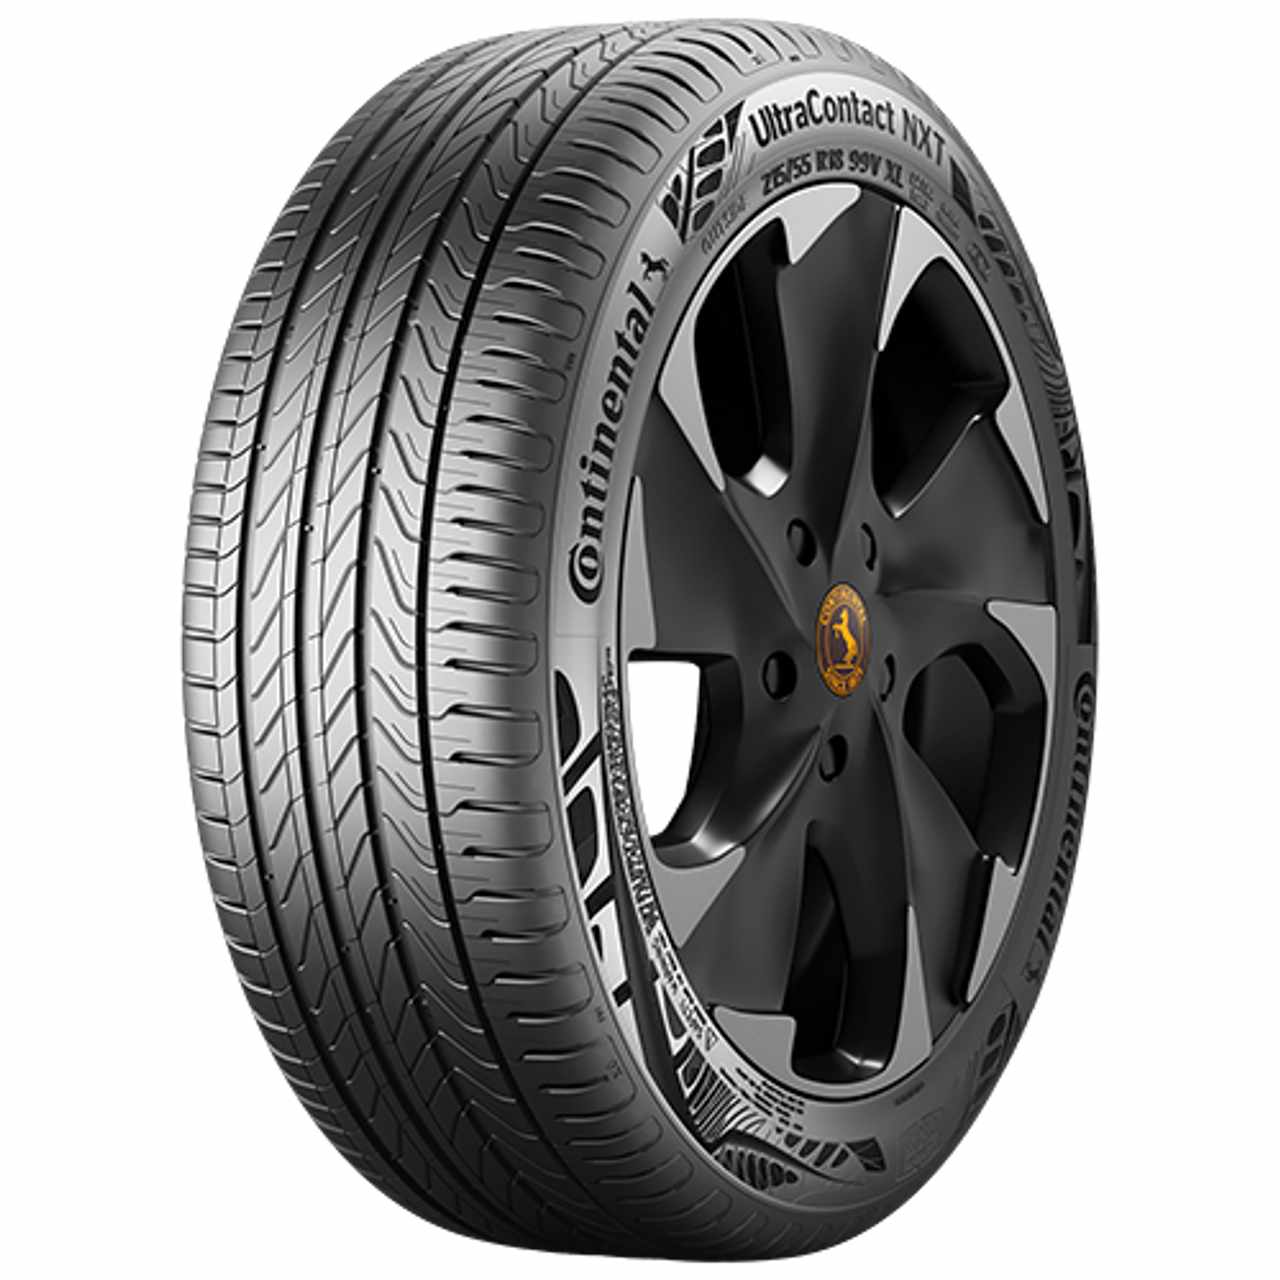 CONTINENTAL ULTRACONTACT NXT (EVc) 205/55R17 95V FR BSW XL